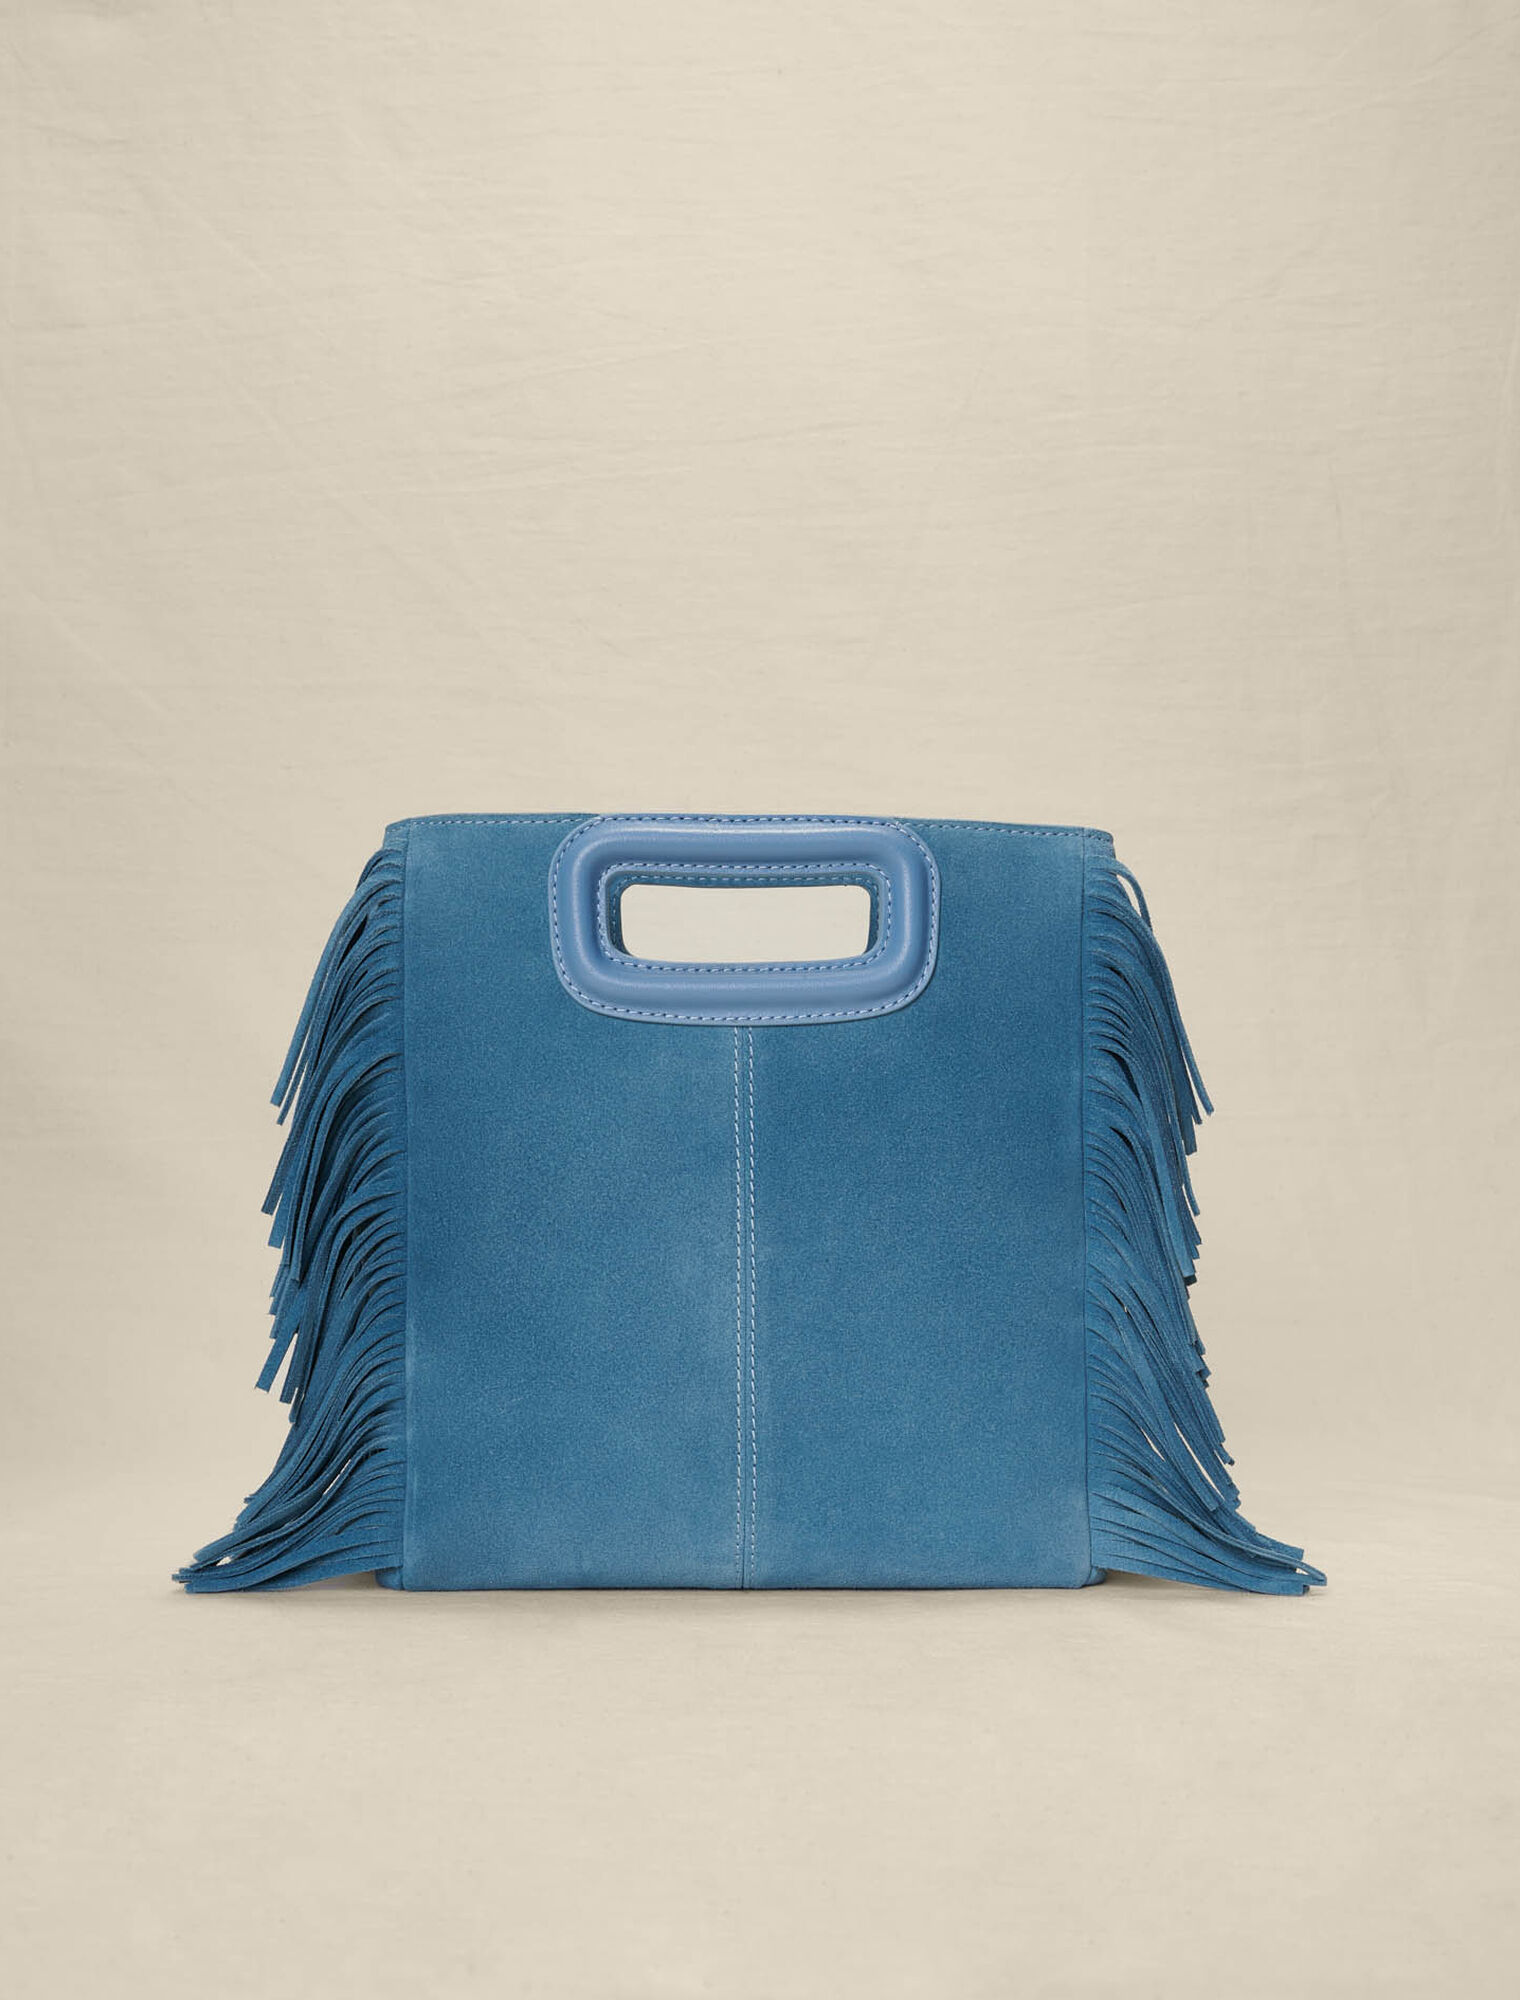 Studded leather M bag with fringing